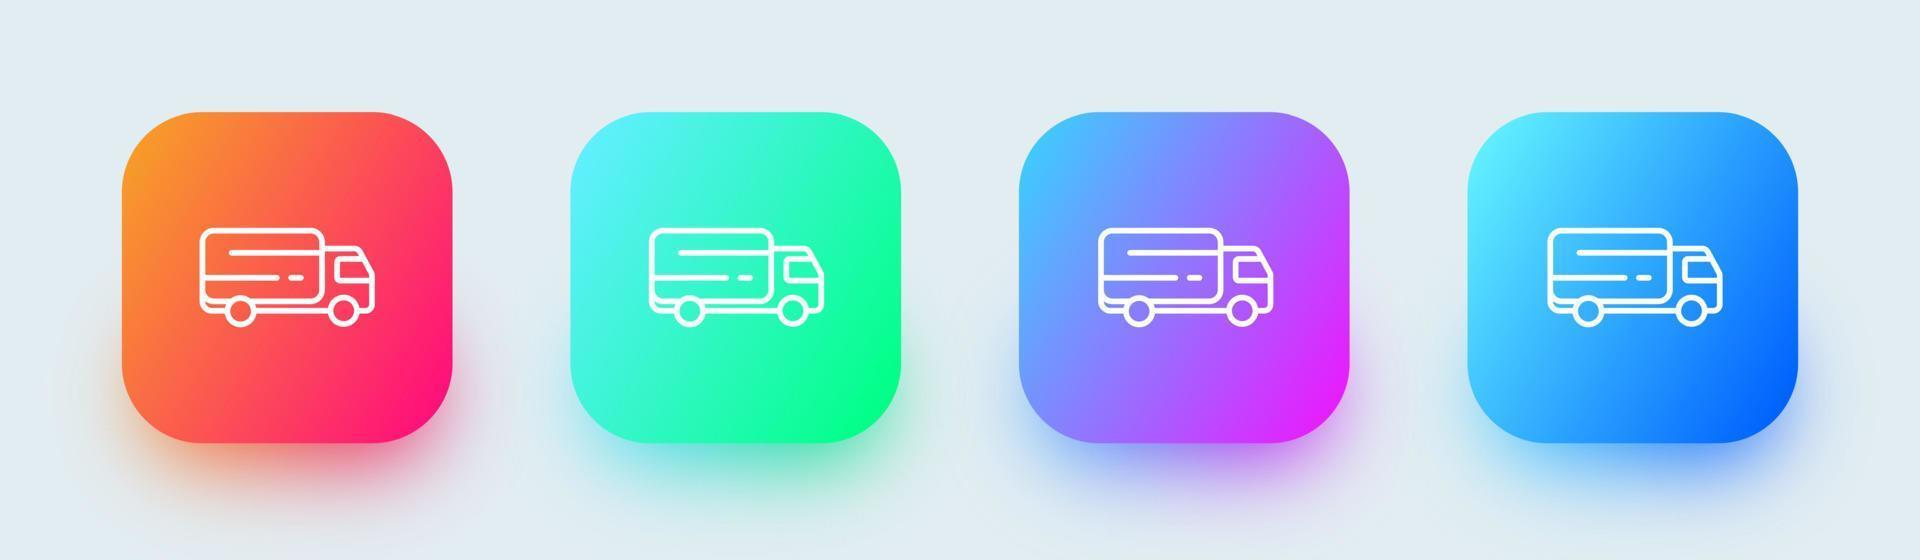 Truck square icon for transportation, commerce apps and websites in gradient colors. Delivery icons set. vector